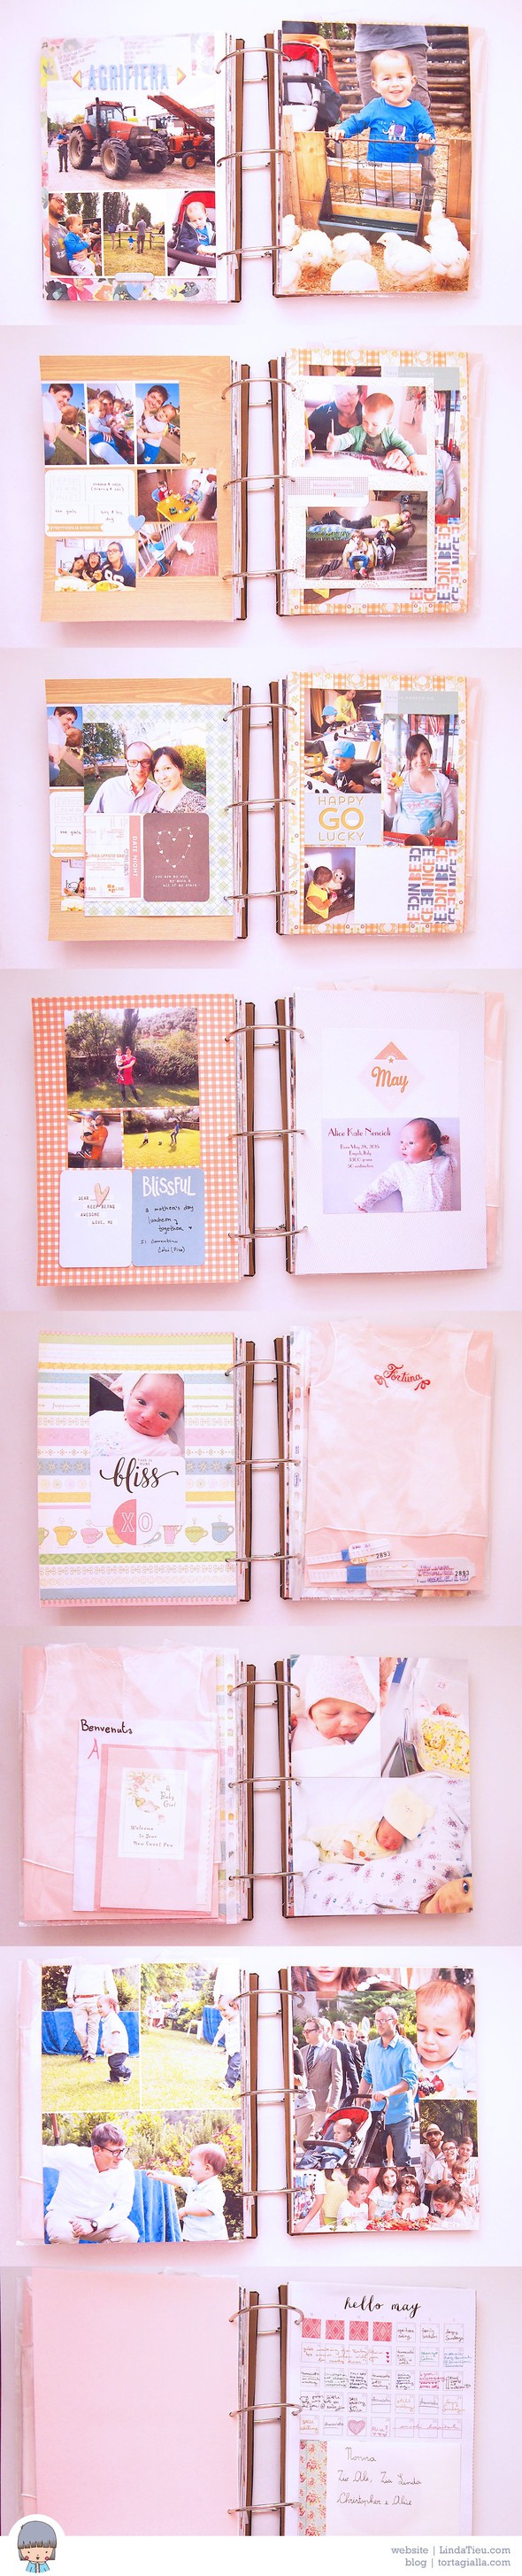 May 2015 Project Life Memory Book Pages by tortagialla gallery